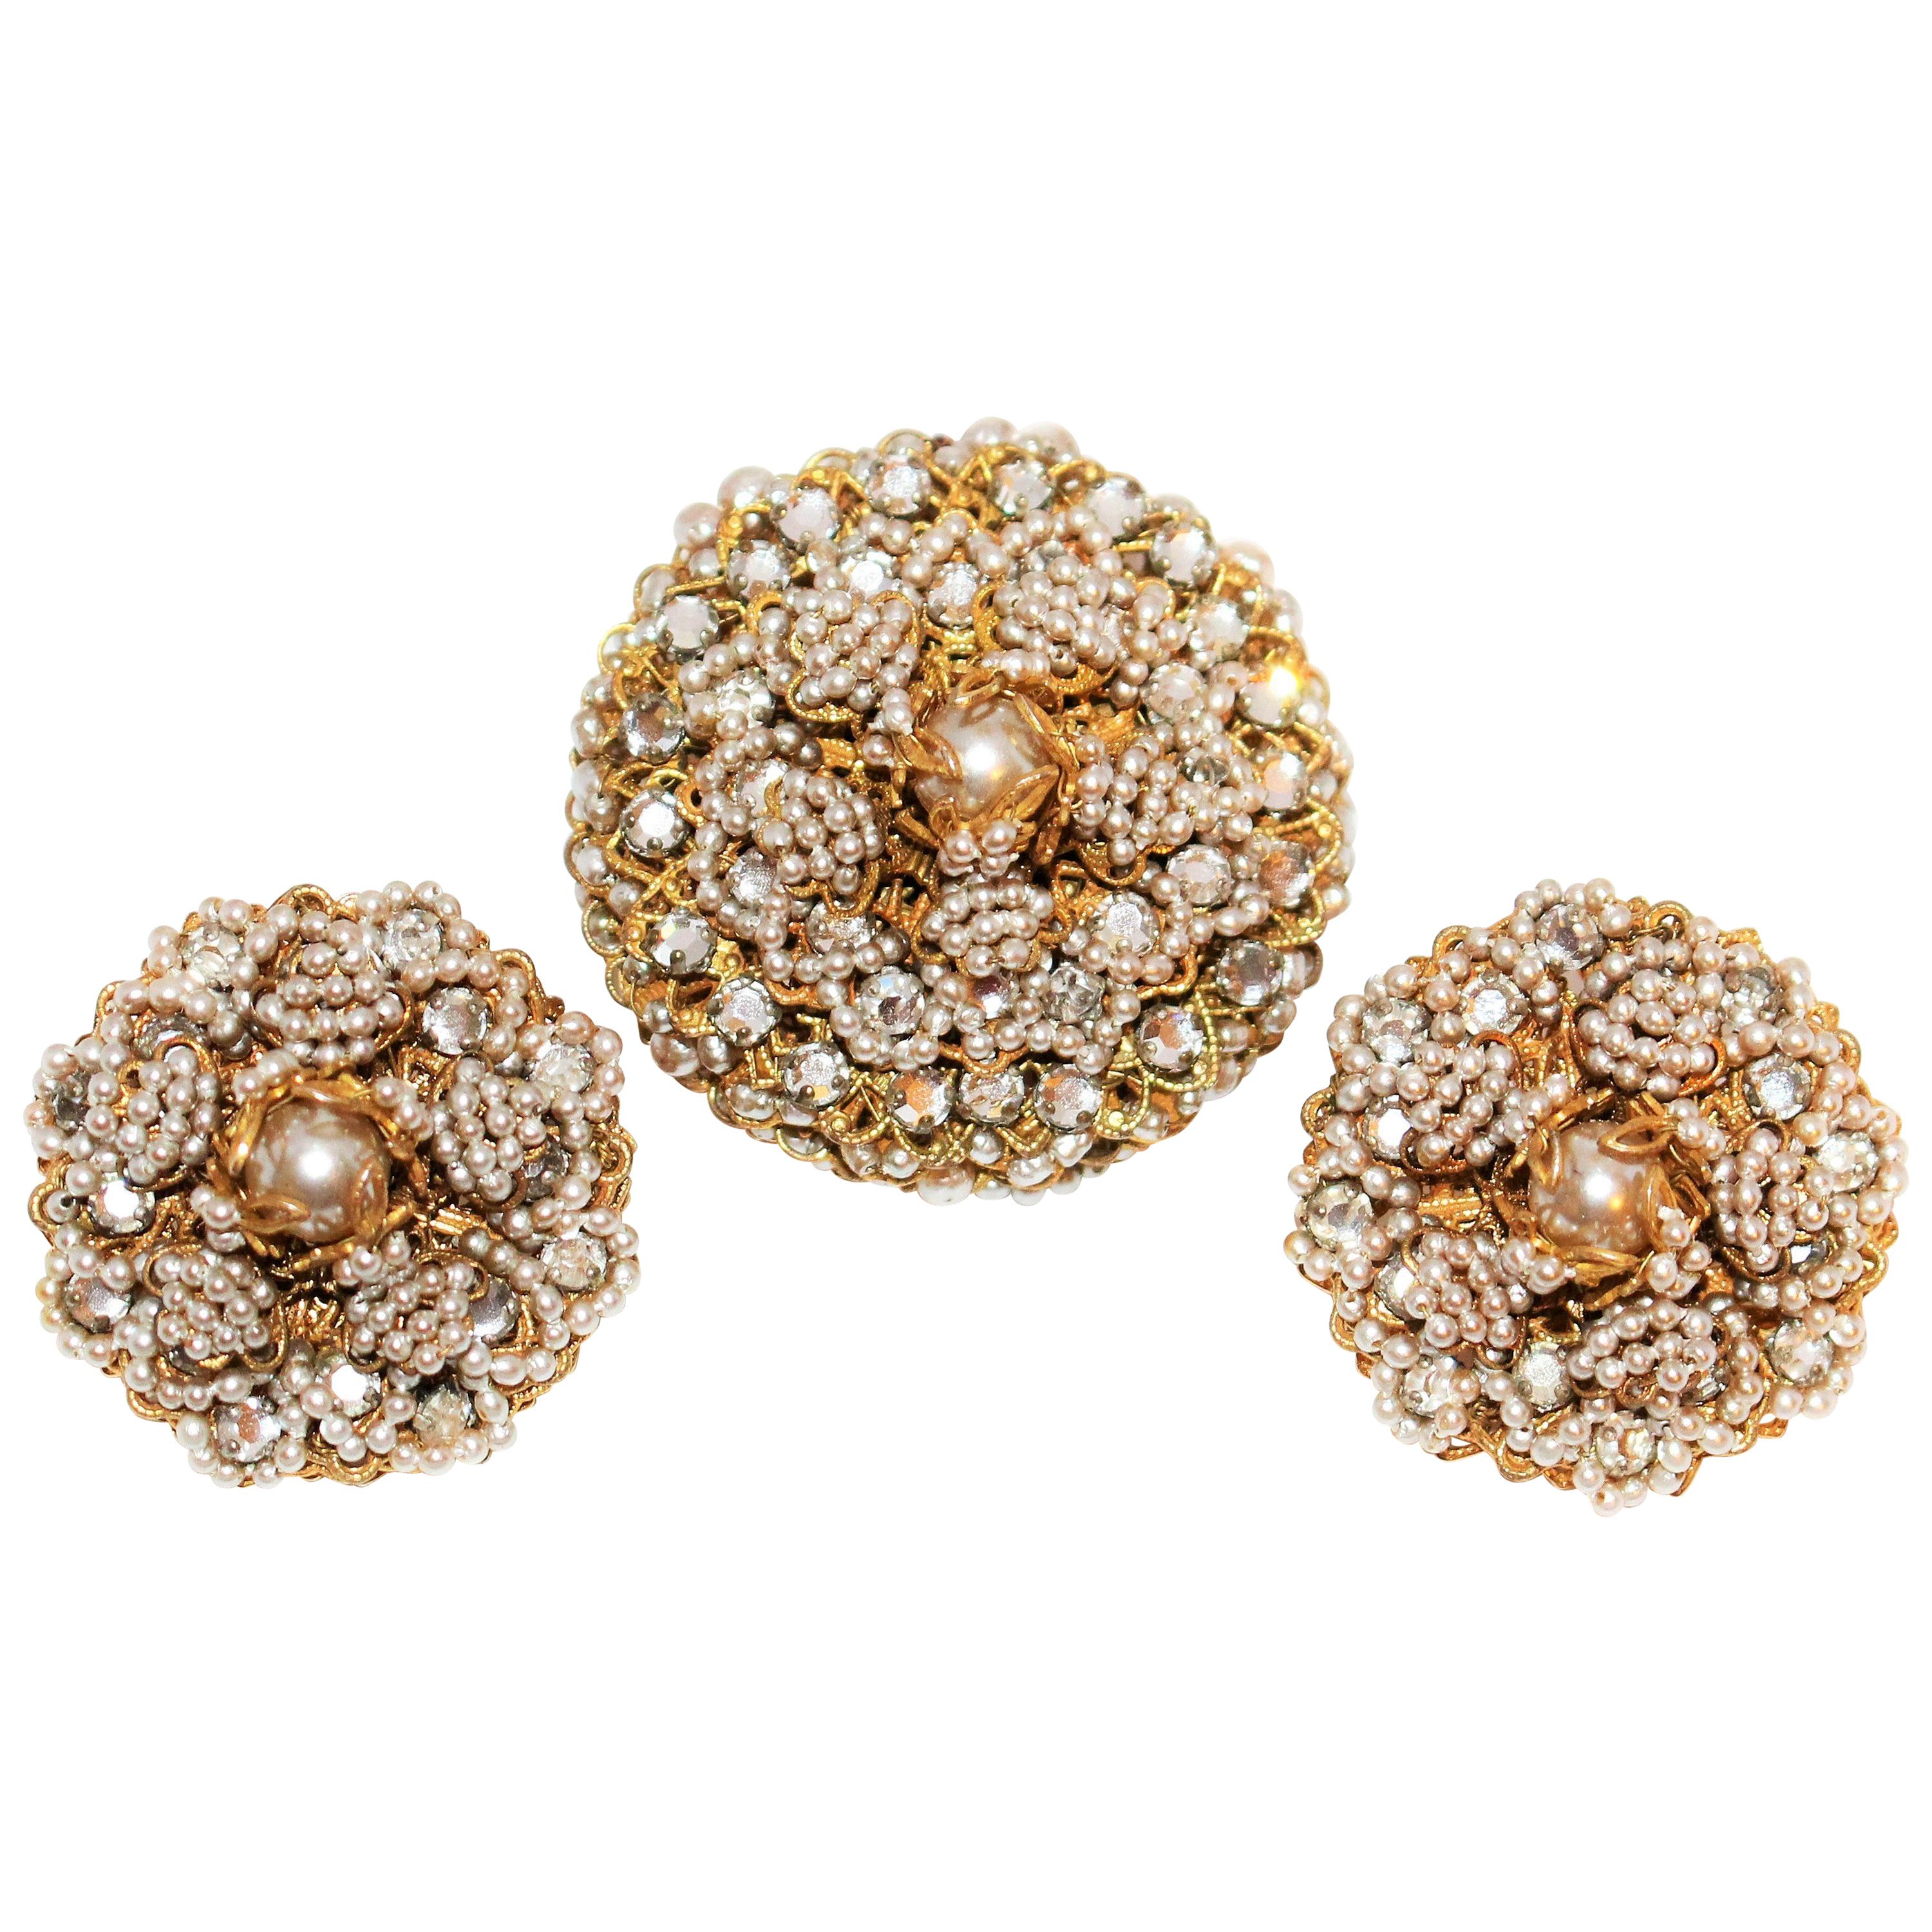 Circa 1968 William deLillo Faux-Pearl Brooch and Earrings For Sale